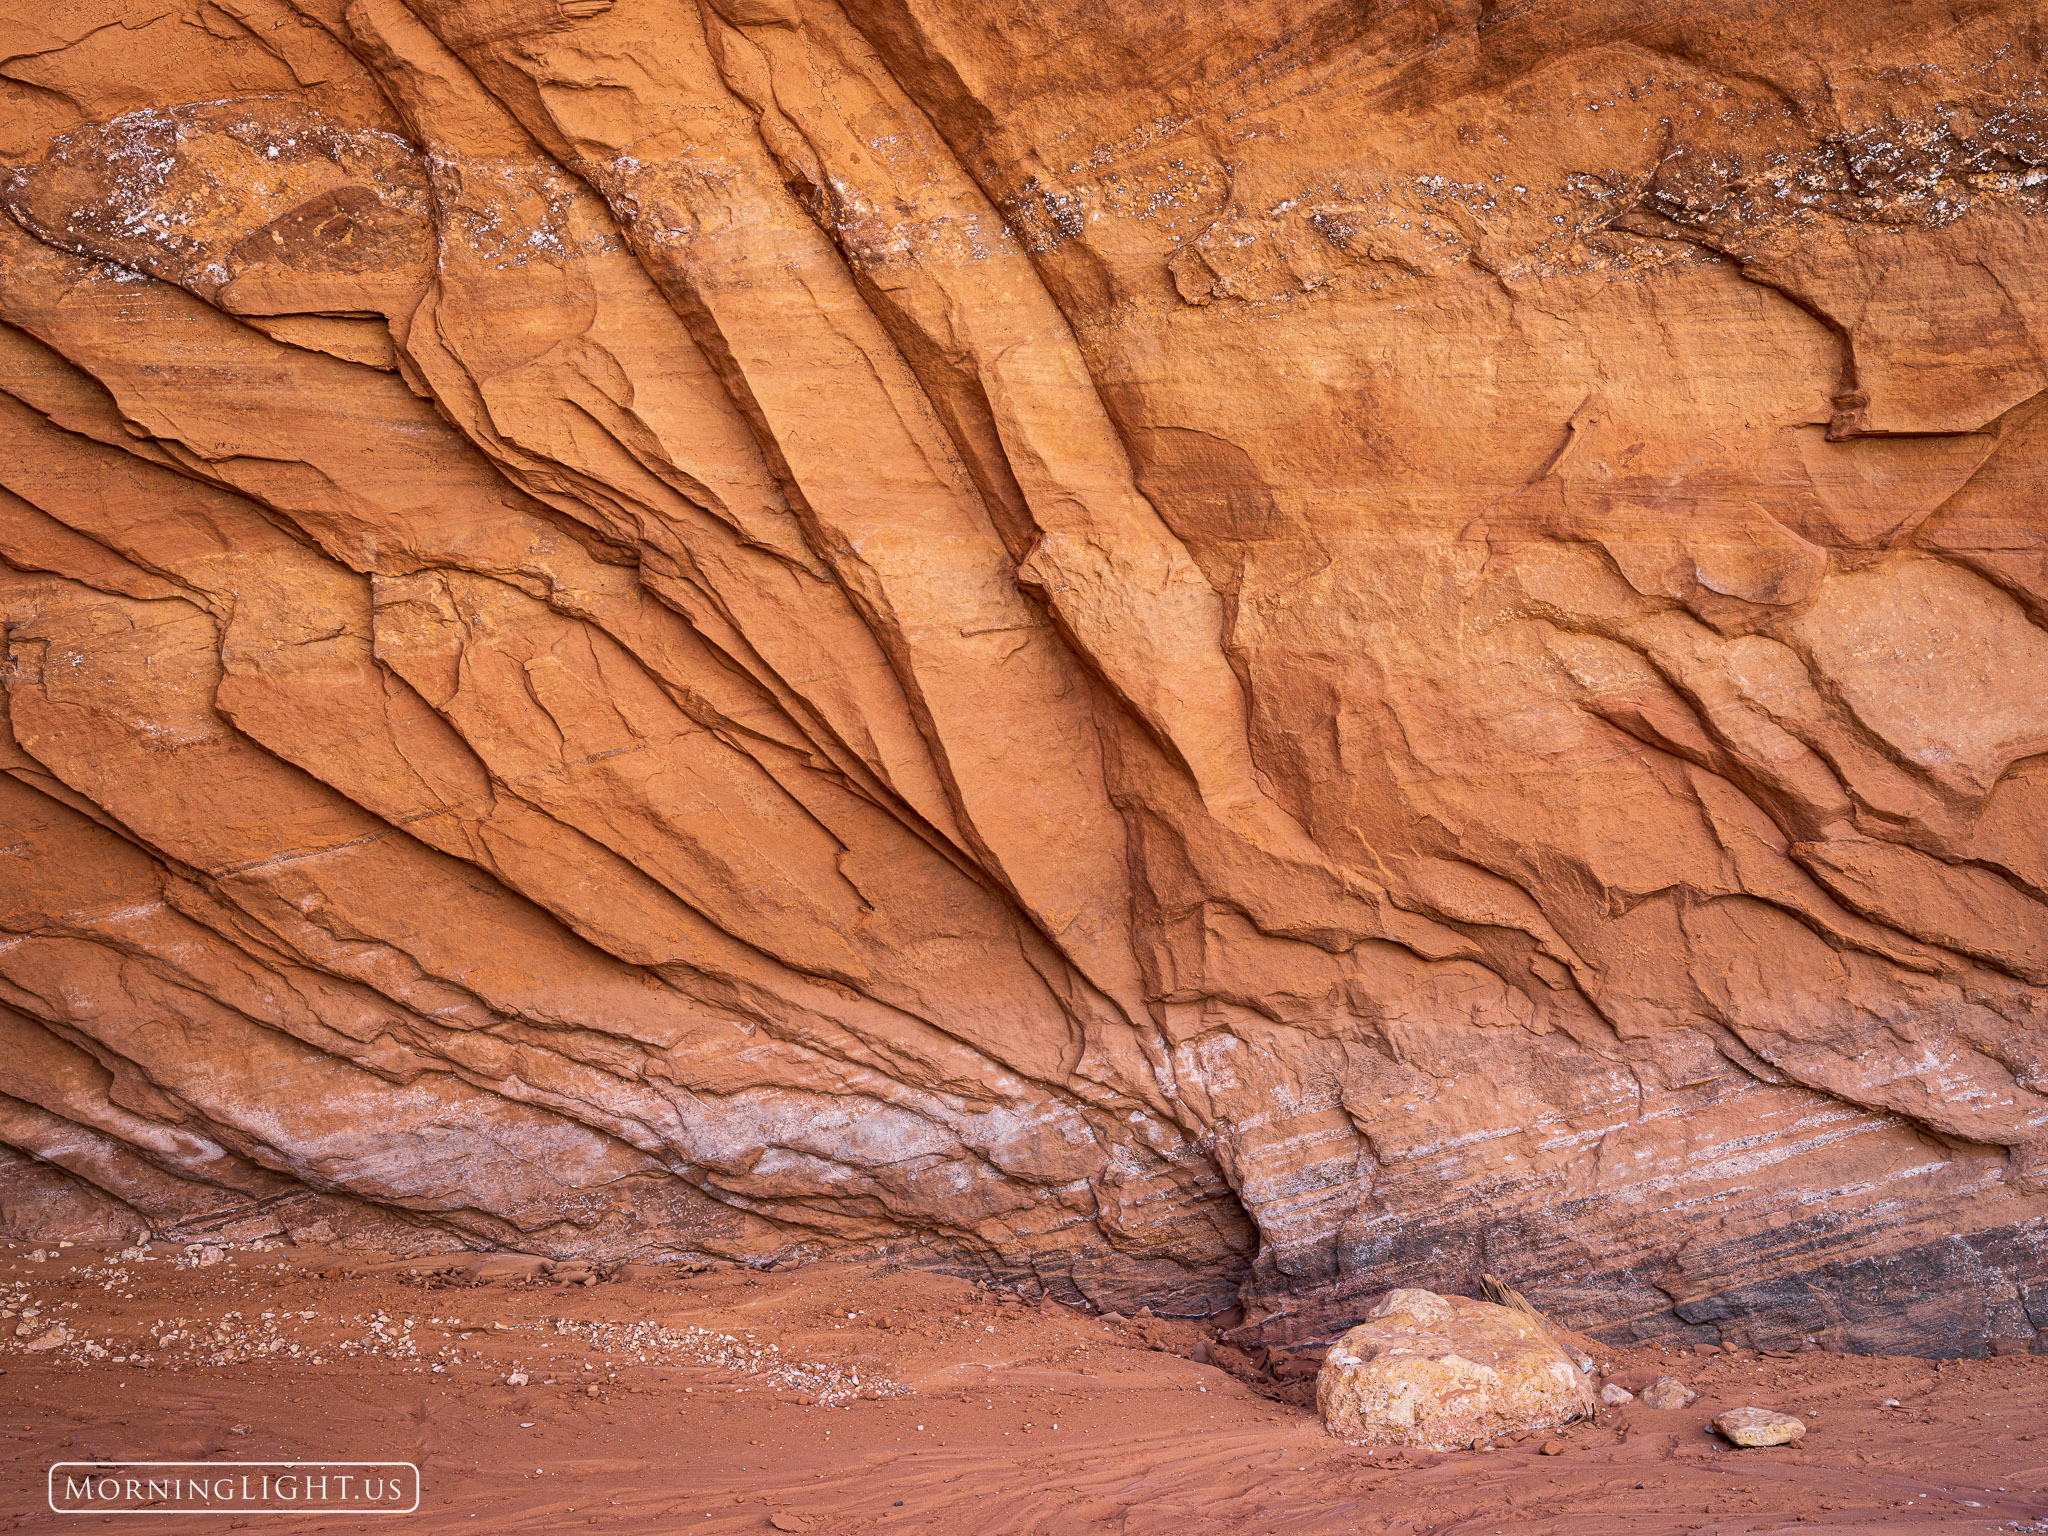 I spent hours in this Utah canyon photographing the many tones and shapes of the sandstone walls. It was always changing and...